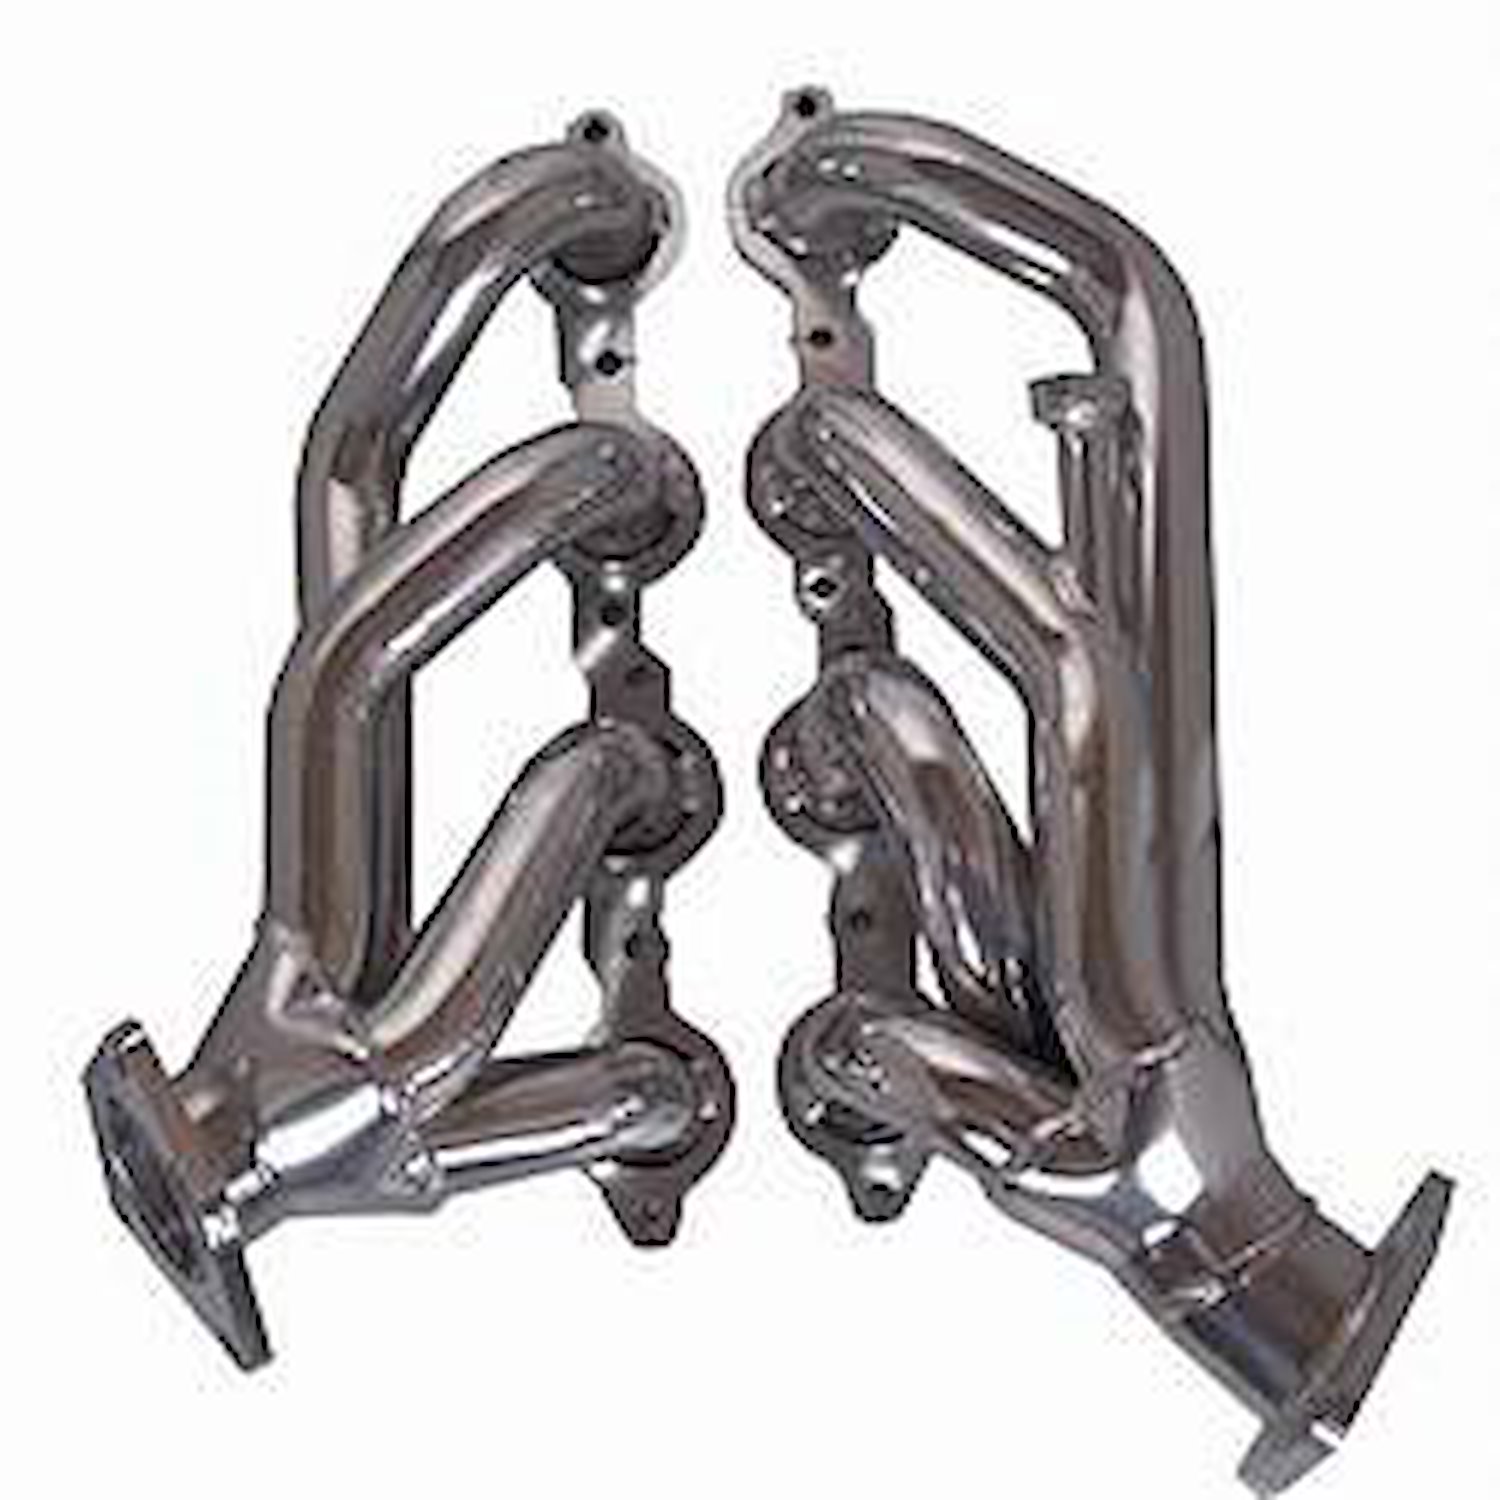 Ceramic Coated Stainless Steel Truck Headers 2002 Cadillac Escalade AWD 6.0L